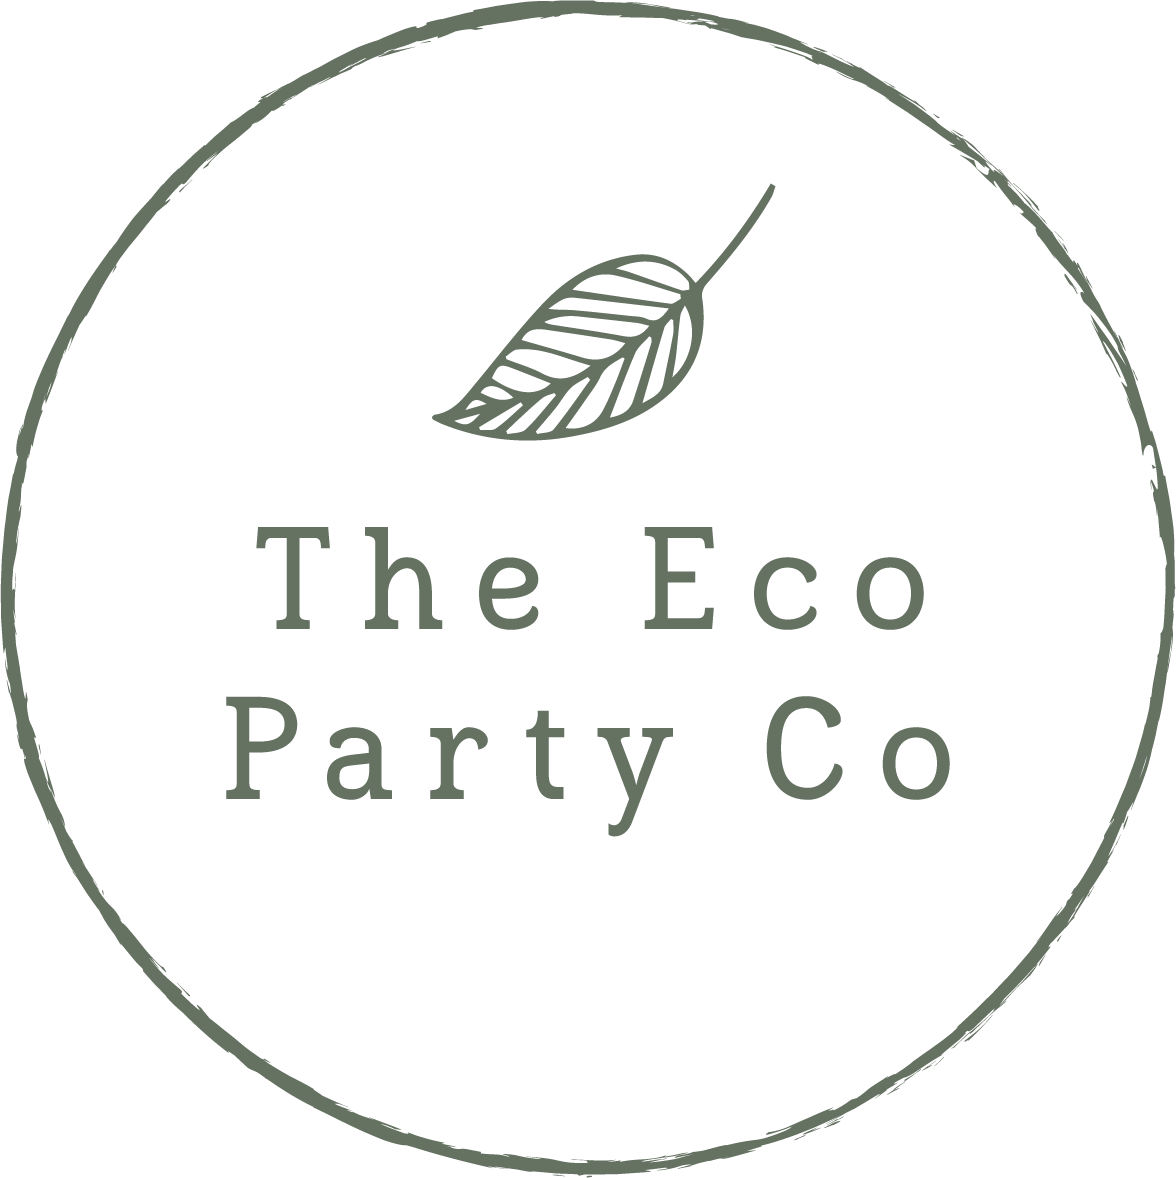 The Eco Party Co